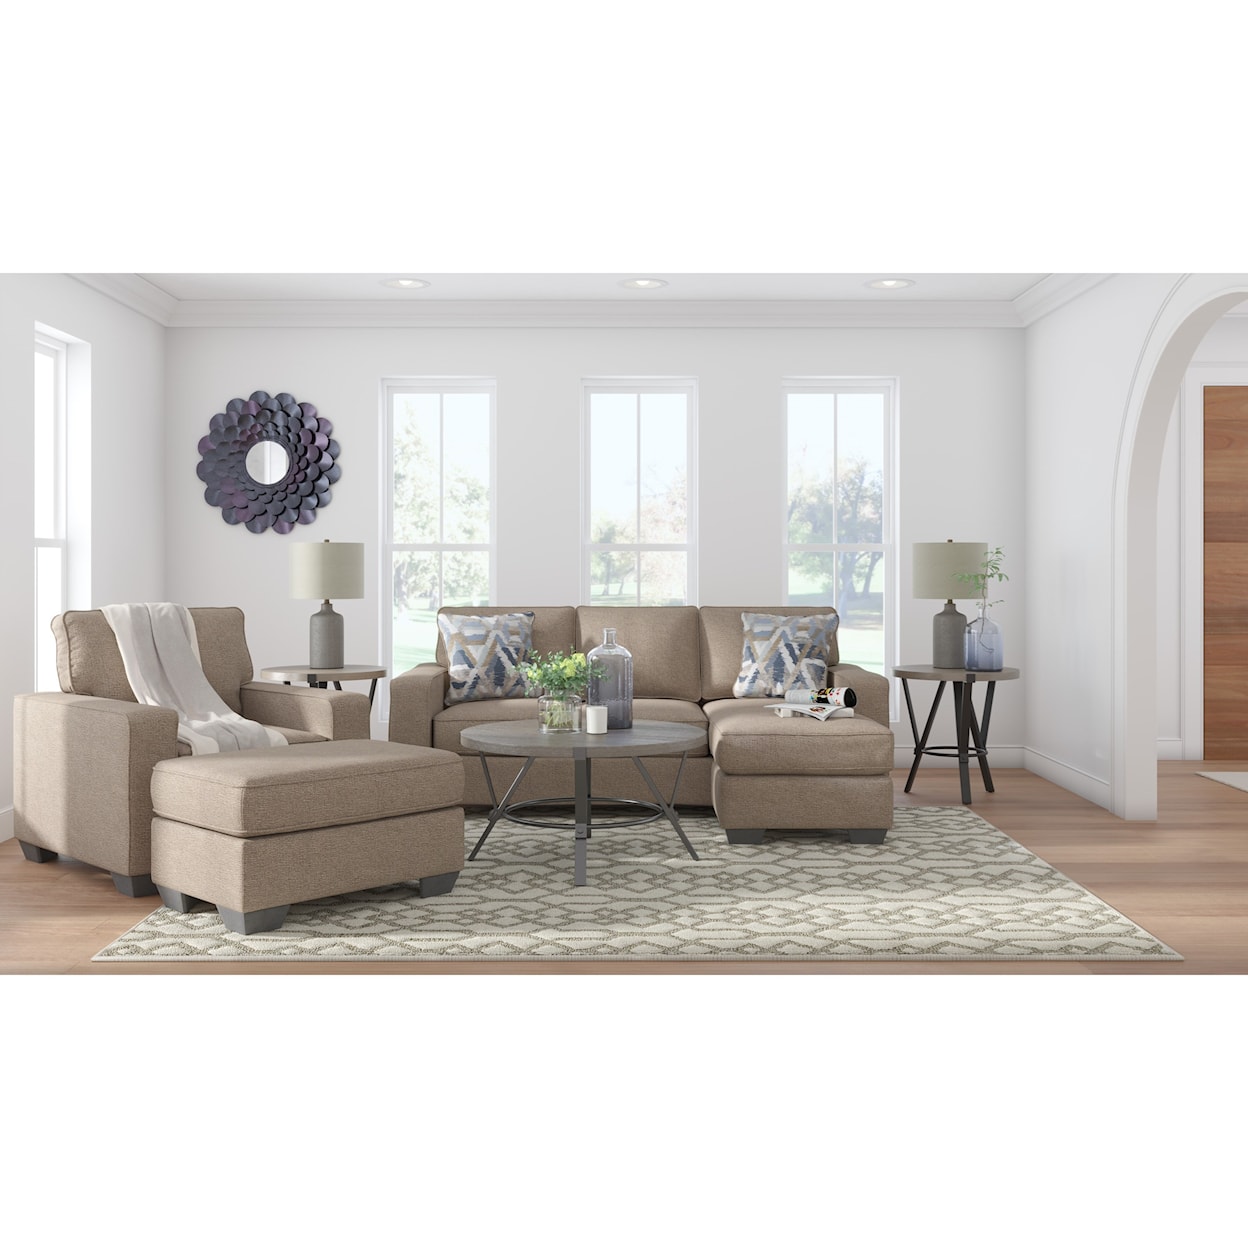 Ashley Furniture Signature Design Greaves Living Room Group